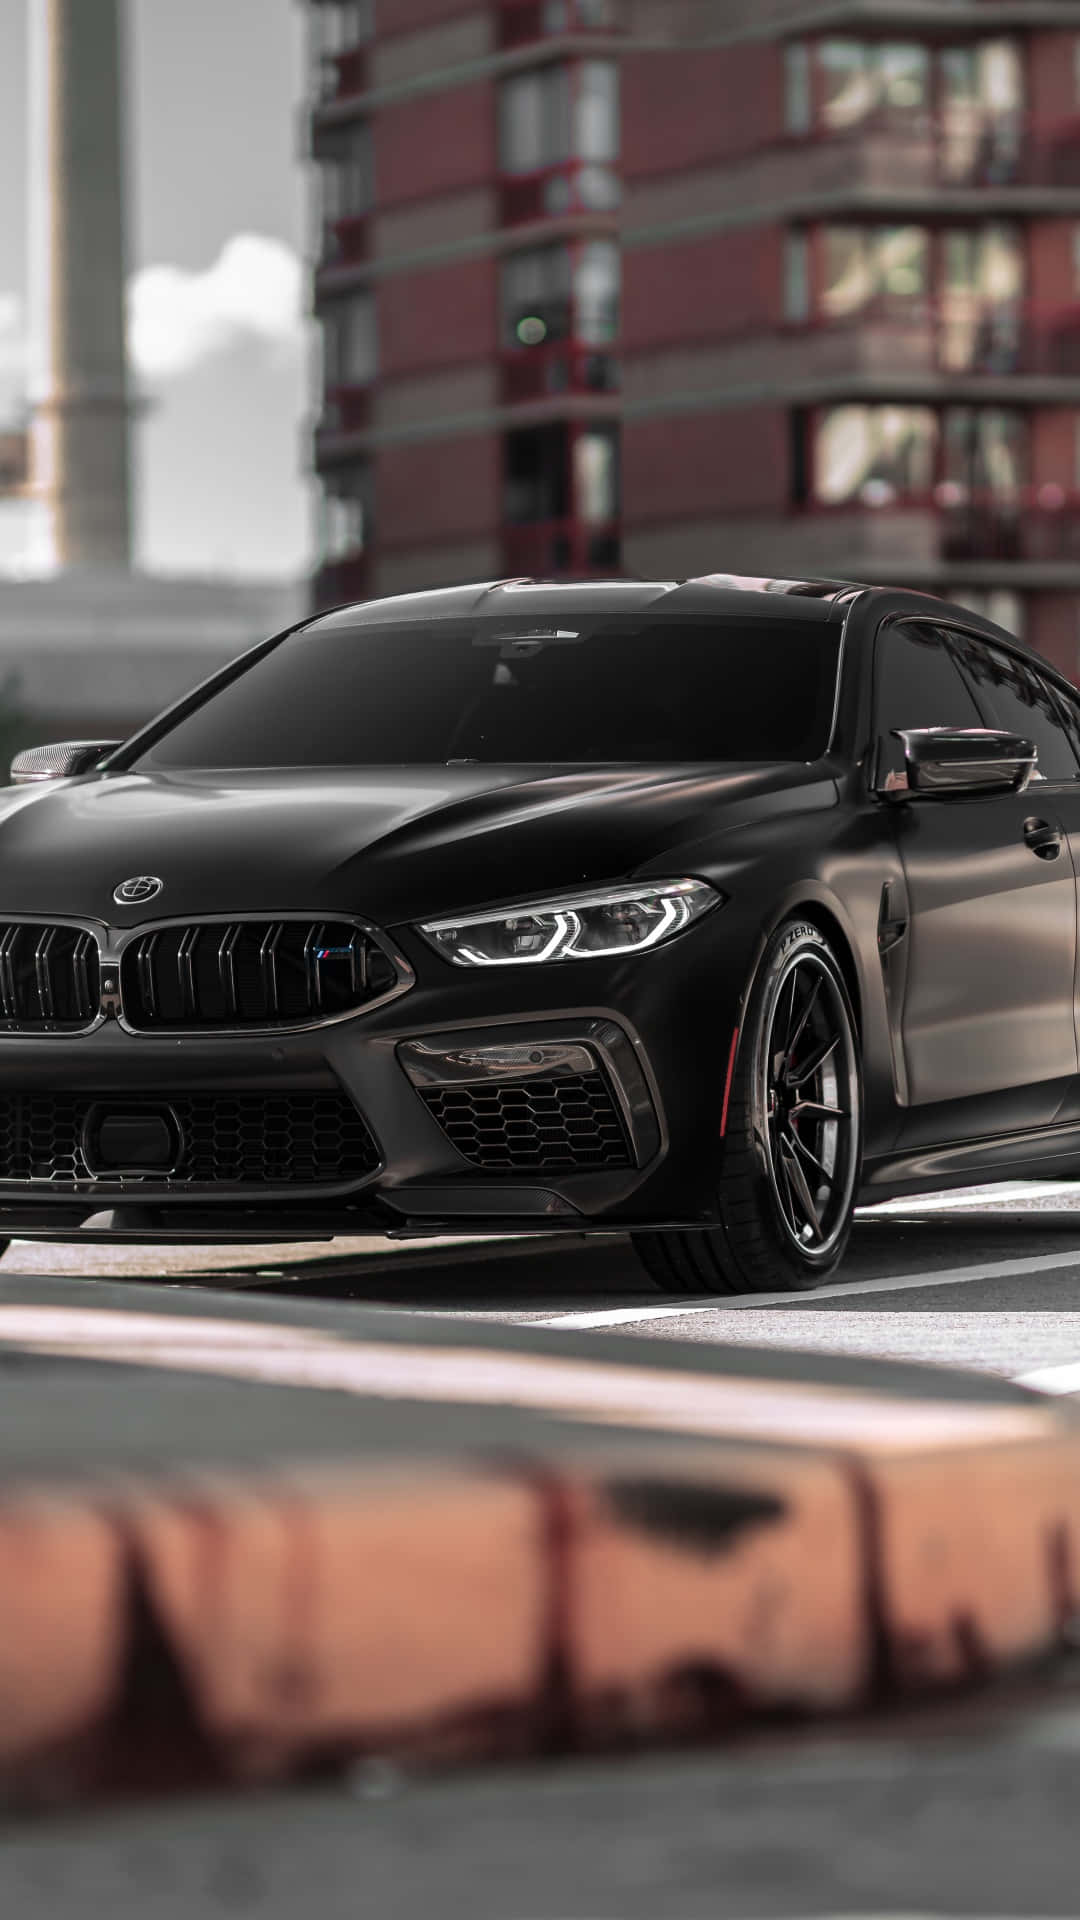 Feel the Luxury of the BMW M8 Wallpaper